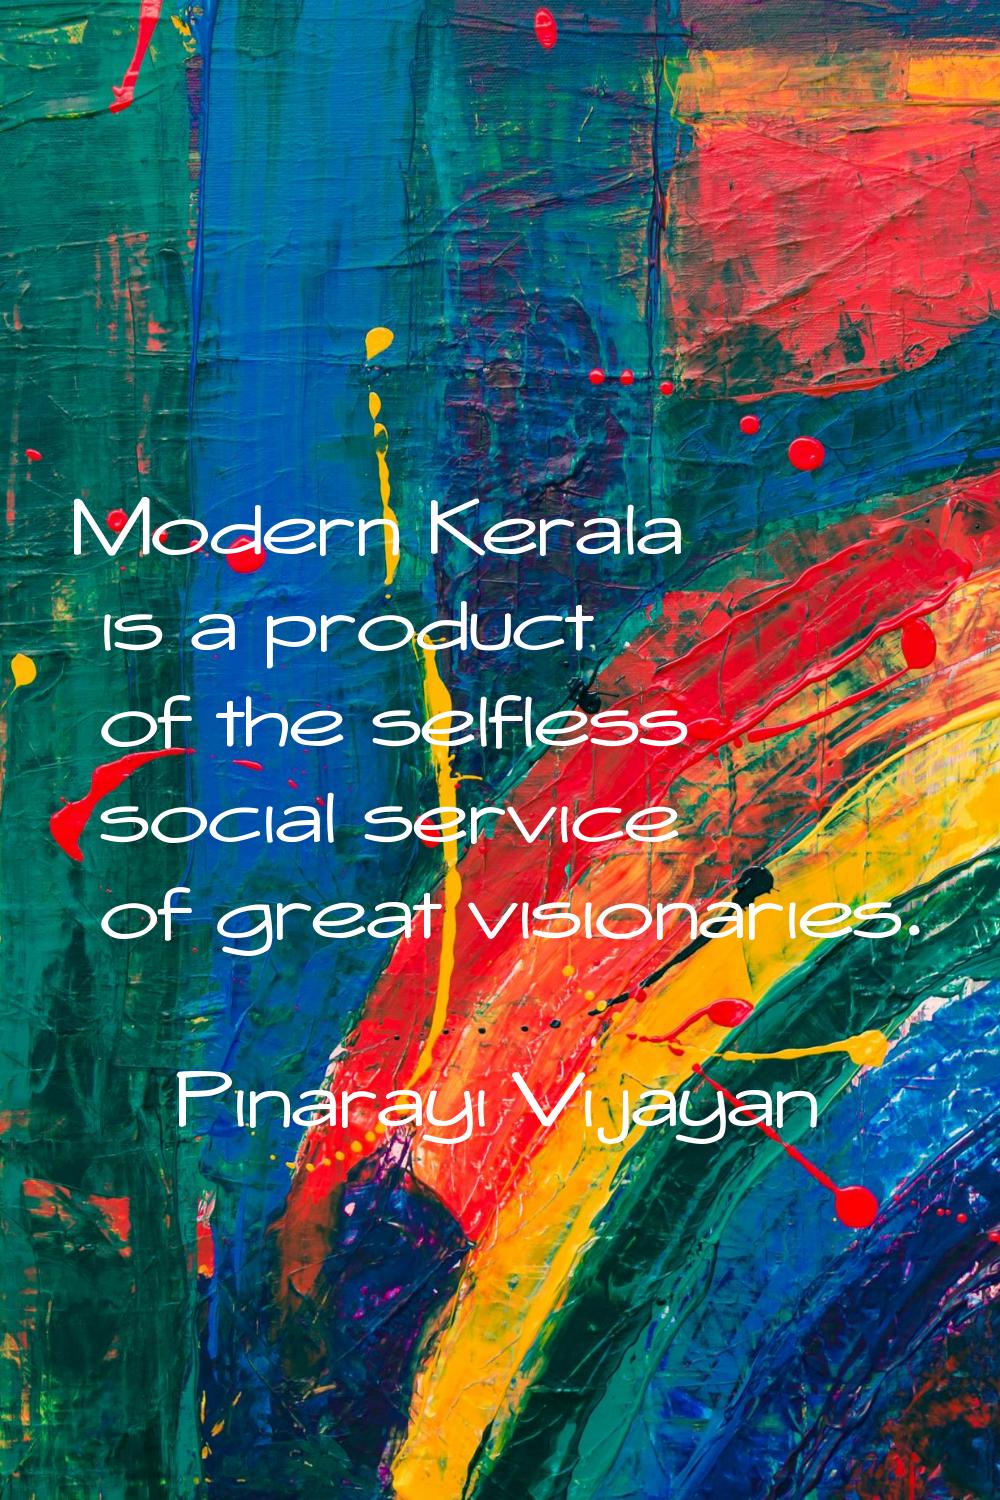 Modern Kerala is a product of the selfless social service of great visionaries.